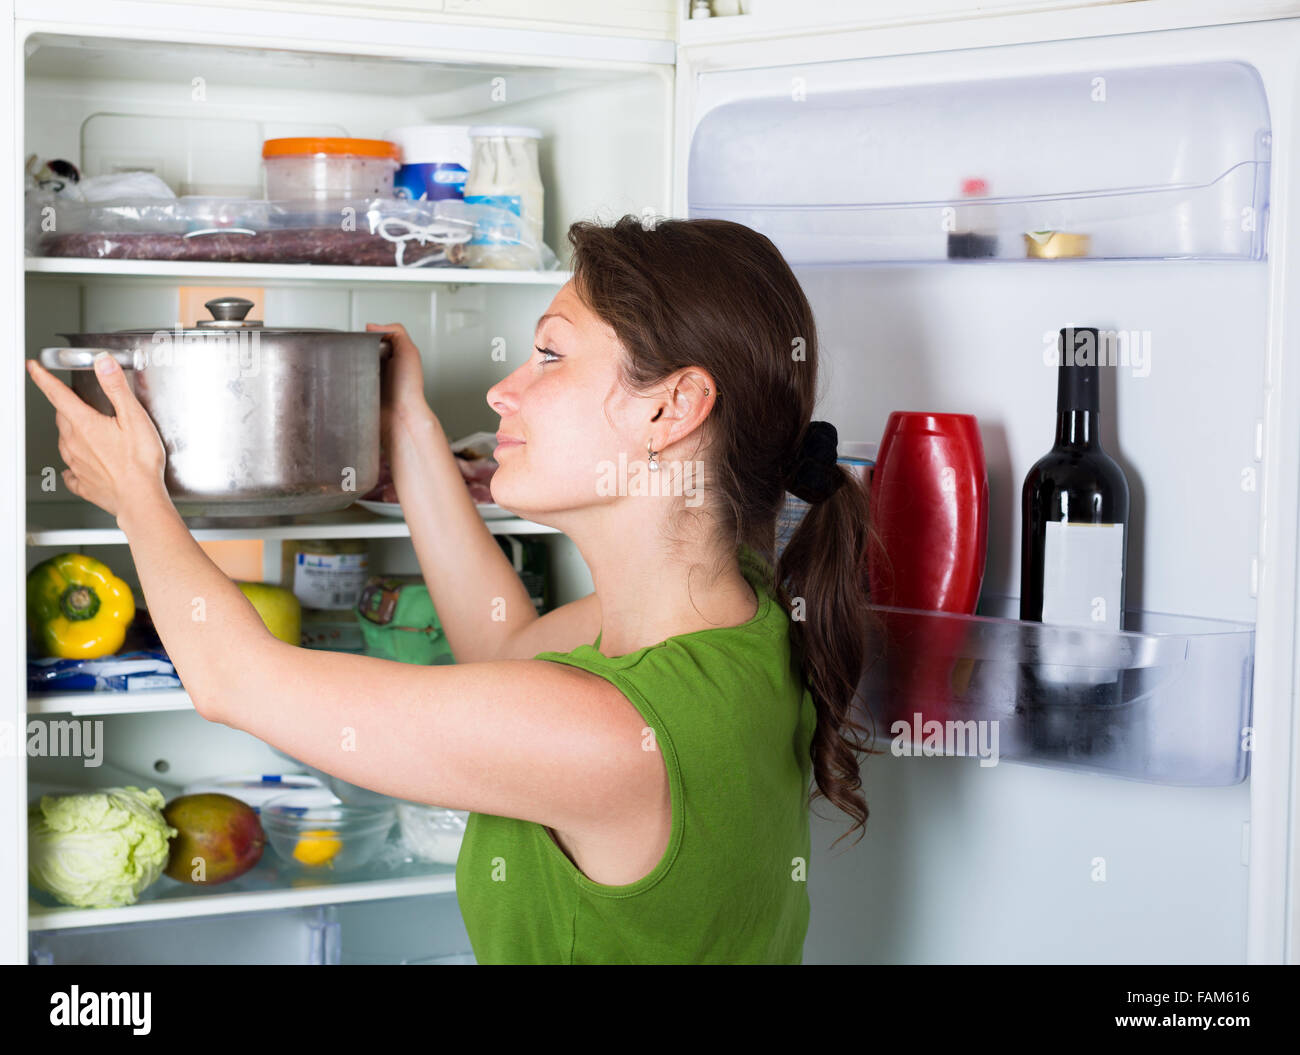 Housewife opening refrigerator at domestic kitchen Stock Photo